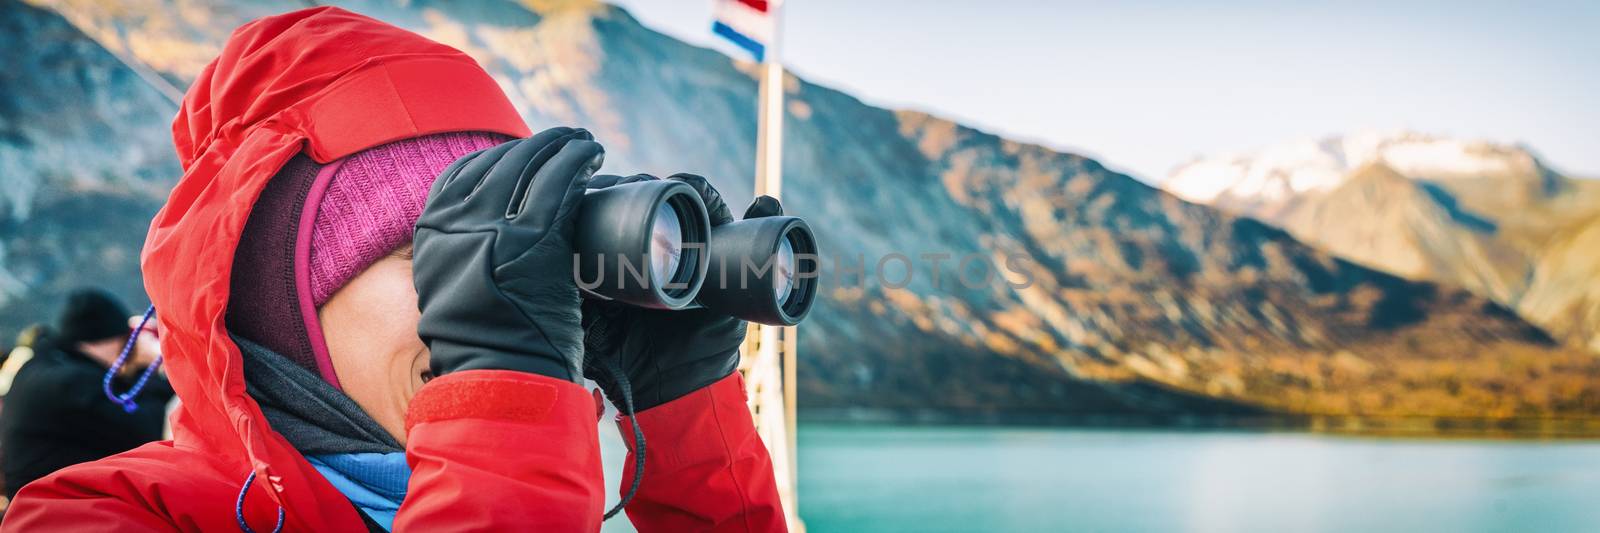 Alaska cruise travel tourist whale watching on boat shore excursion ride at Glacier Bay landscape. Woman looking at view binoculars on cruise ship. Panoramic banner portrait by Maridav